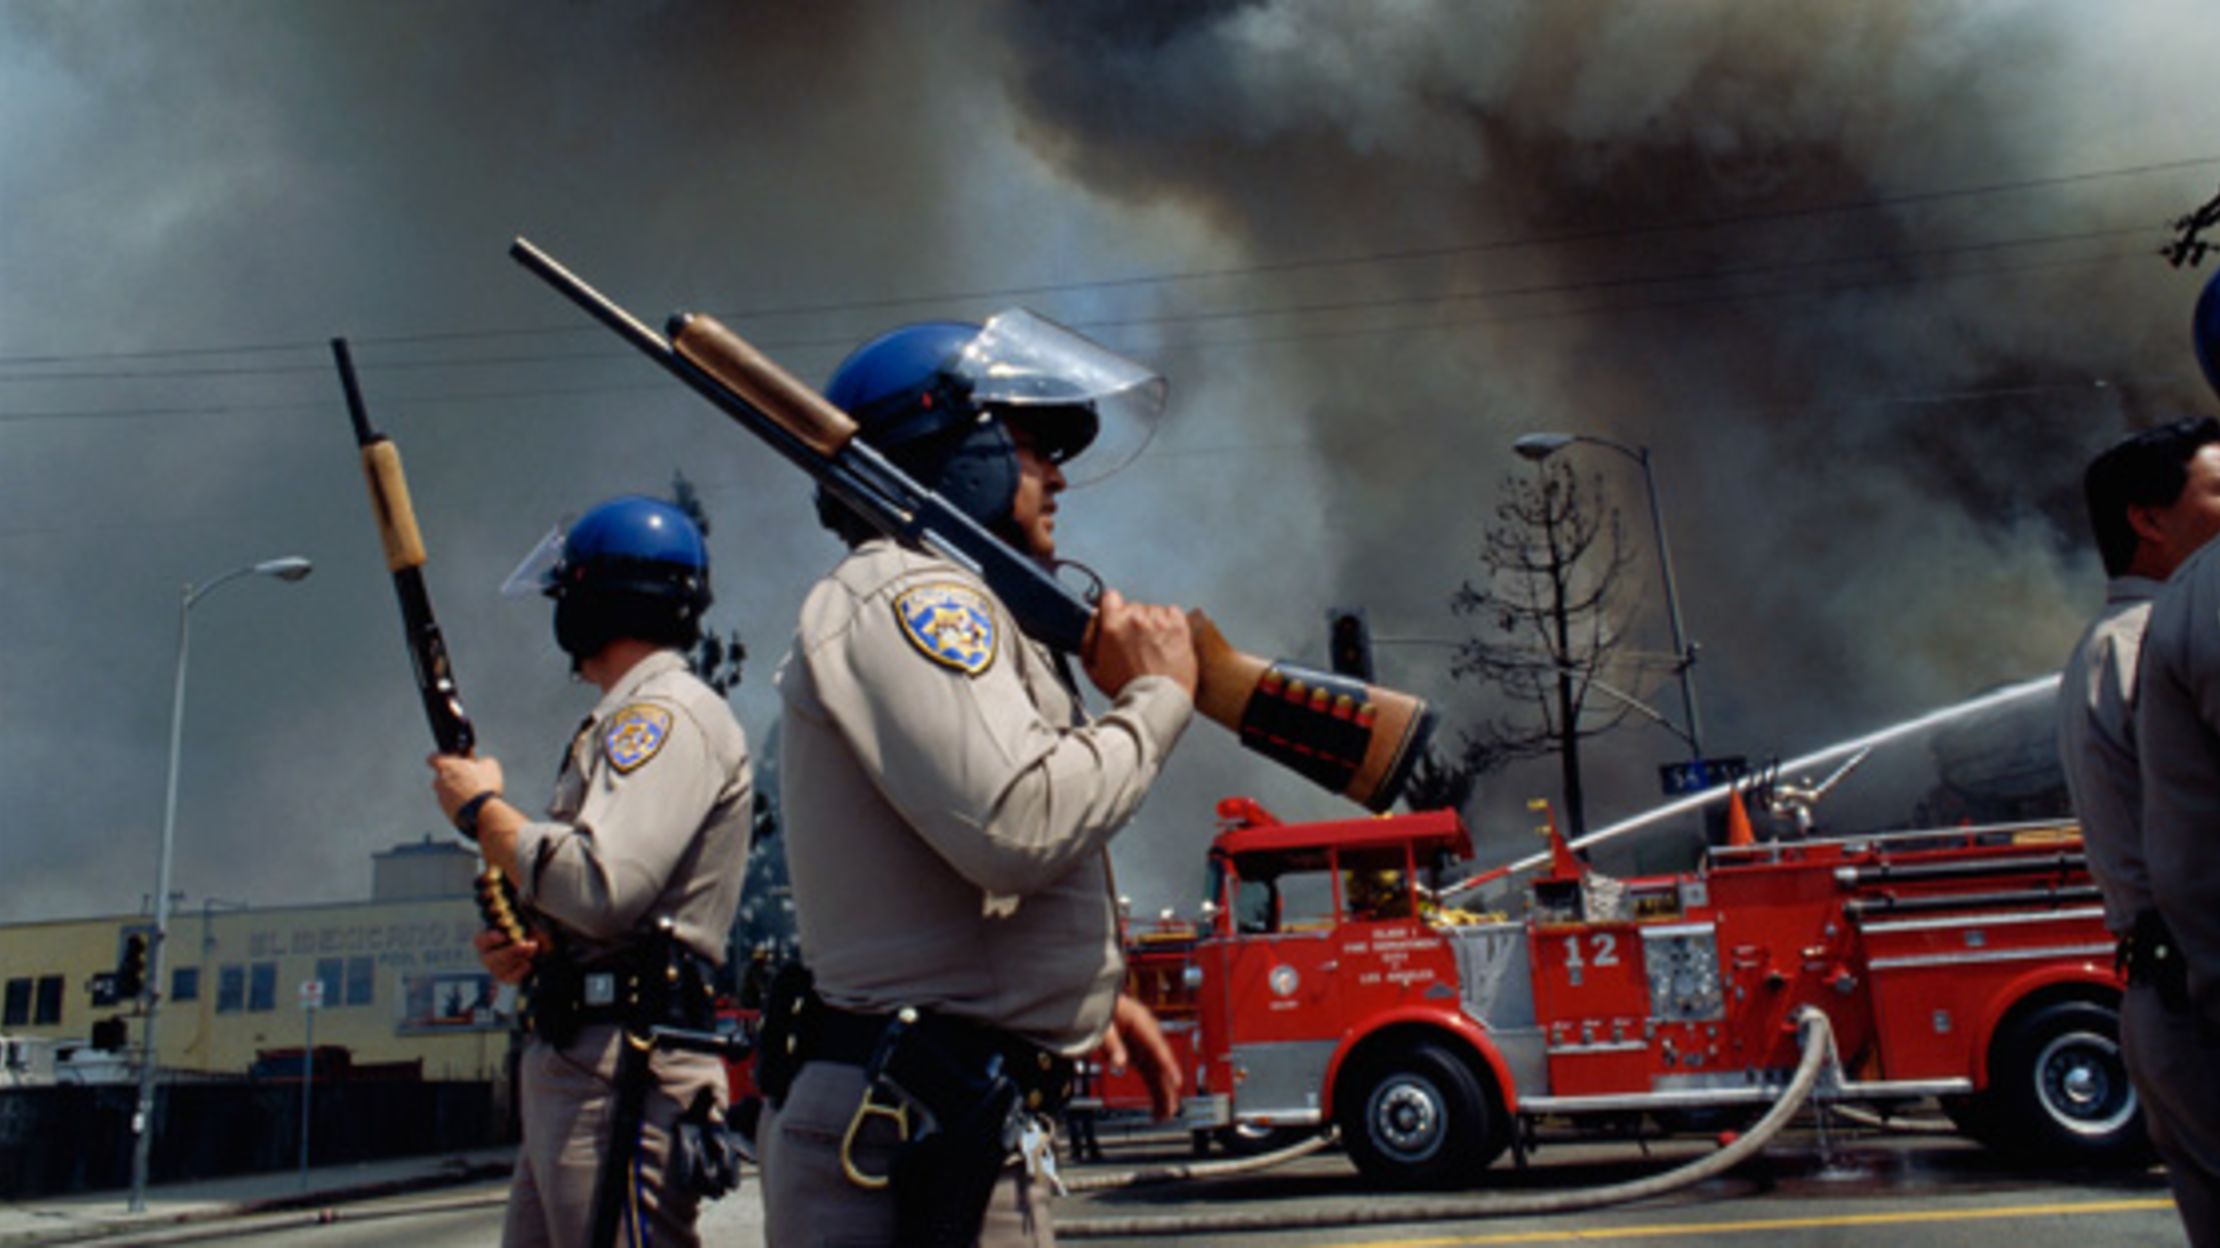 The L.A. Riots Erupted 20 Years Ago Today Mental Floss